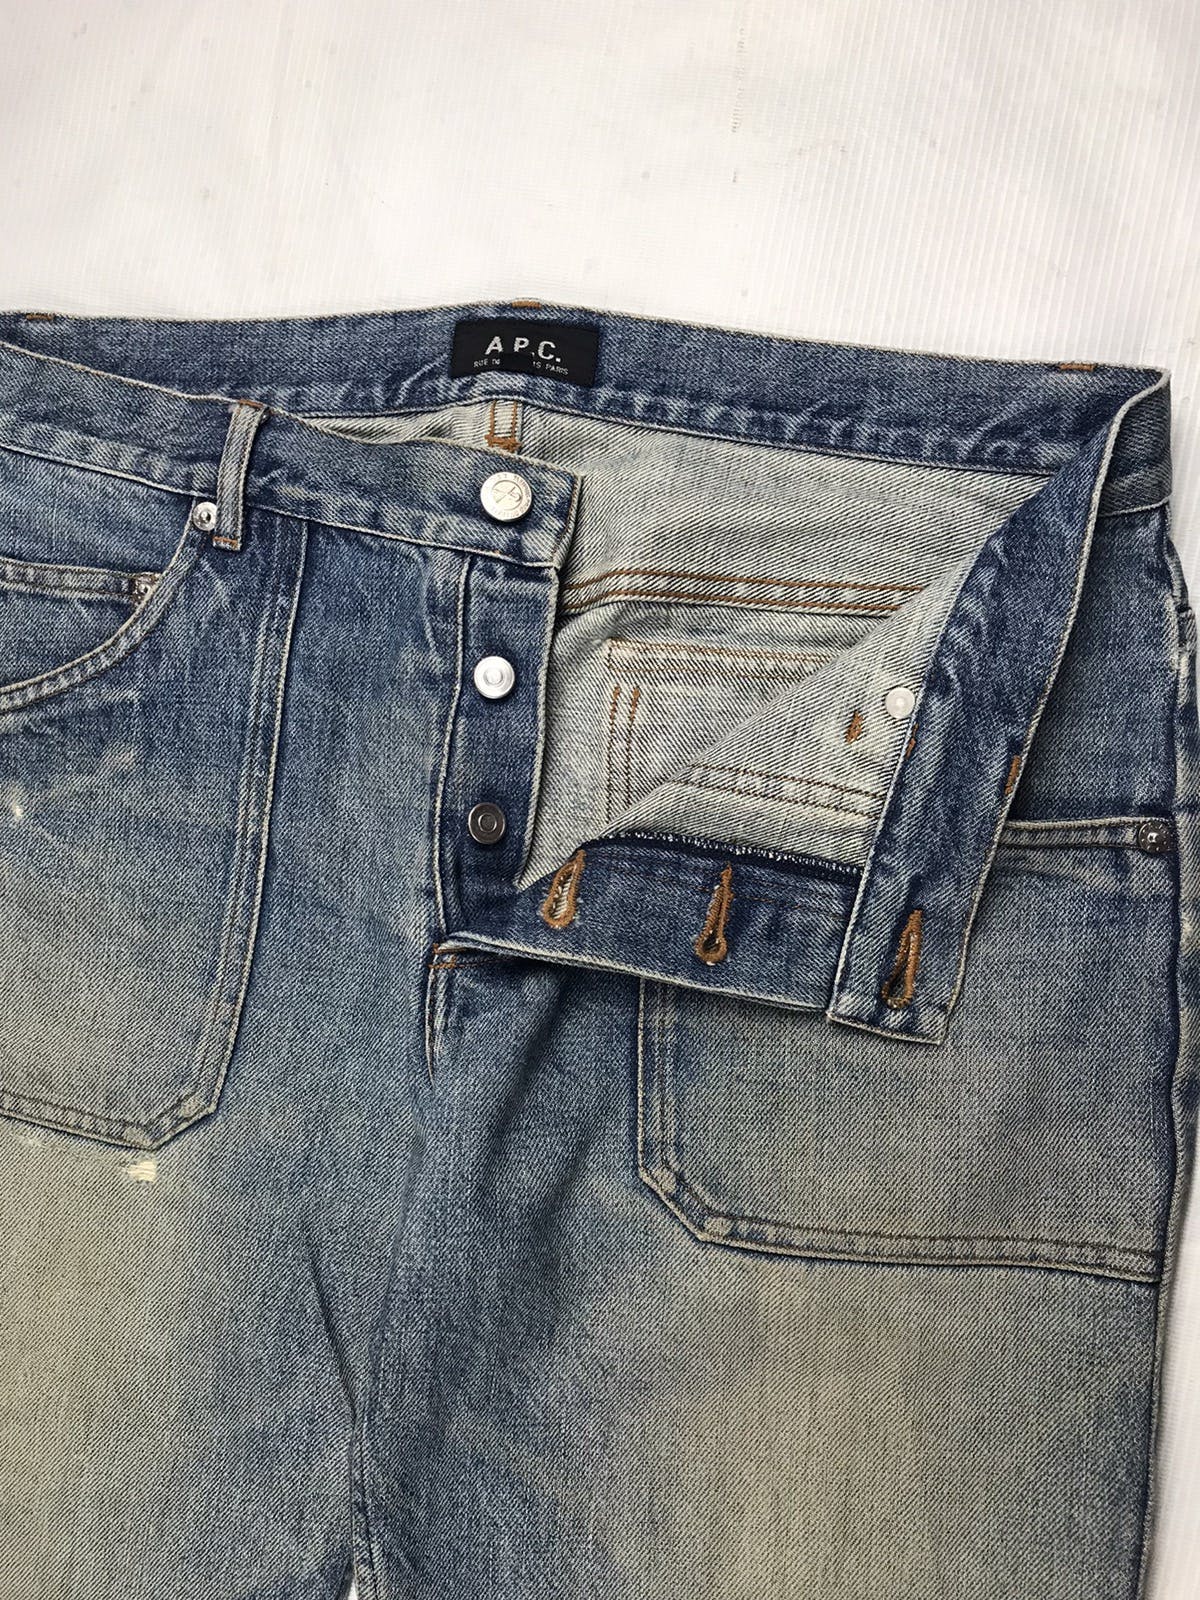 Rare!! A.P.C patch pocket distressed denim Made in Japan - 6